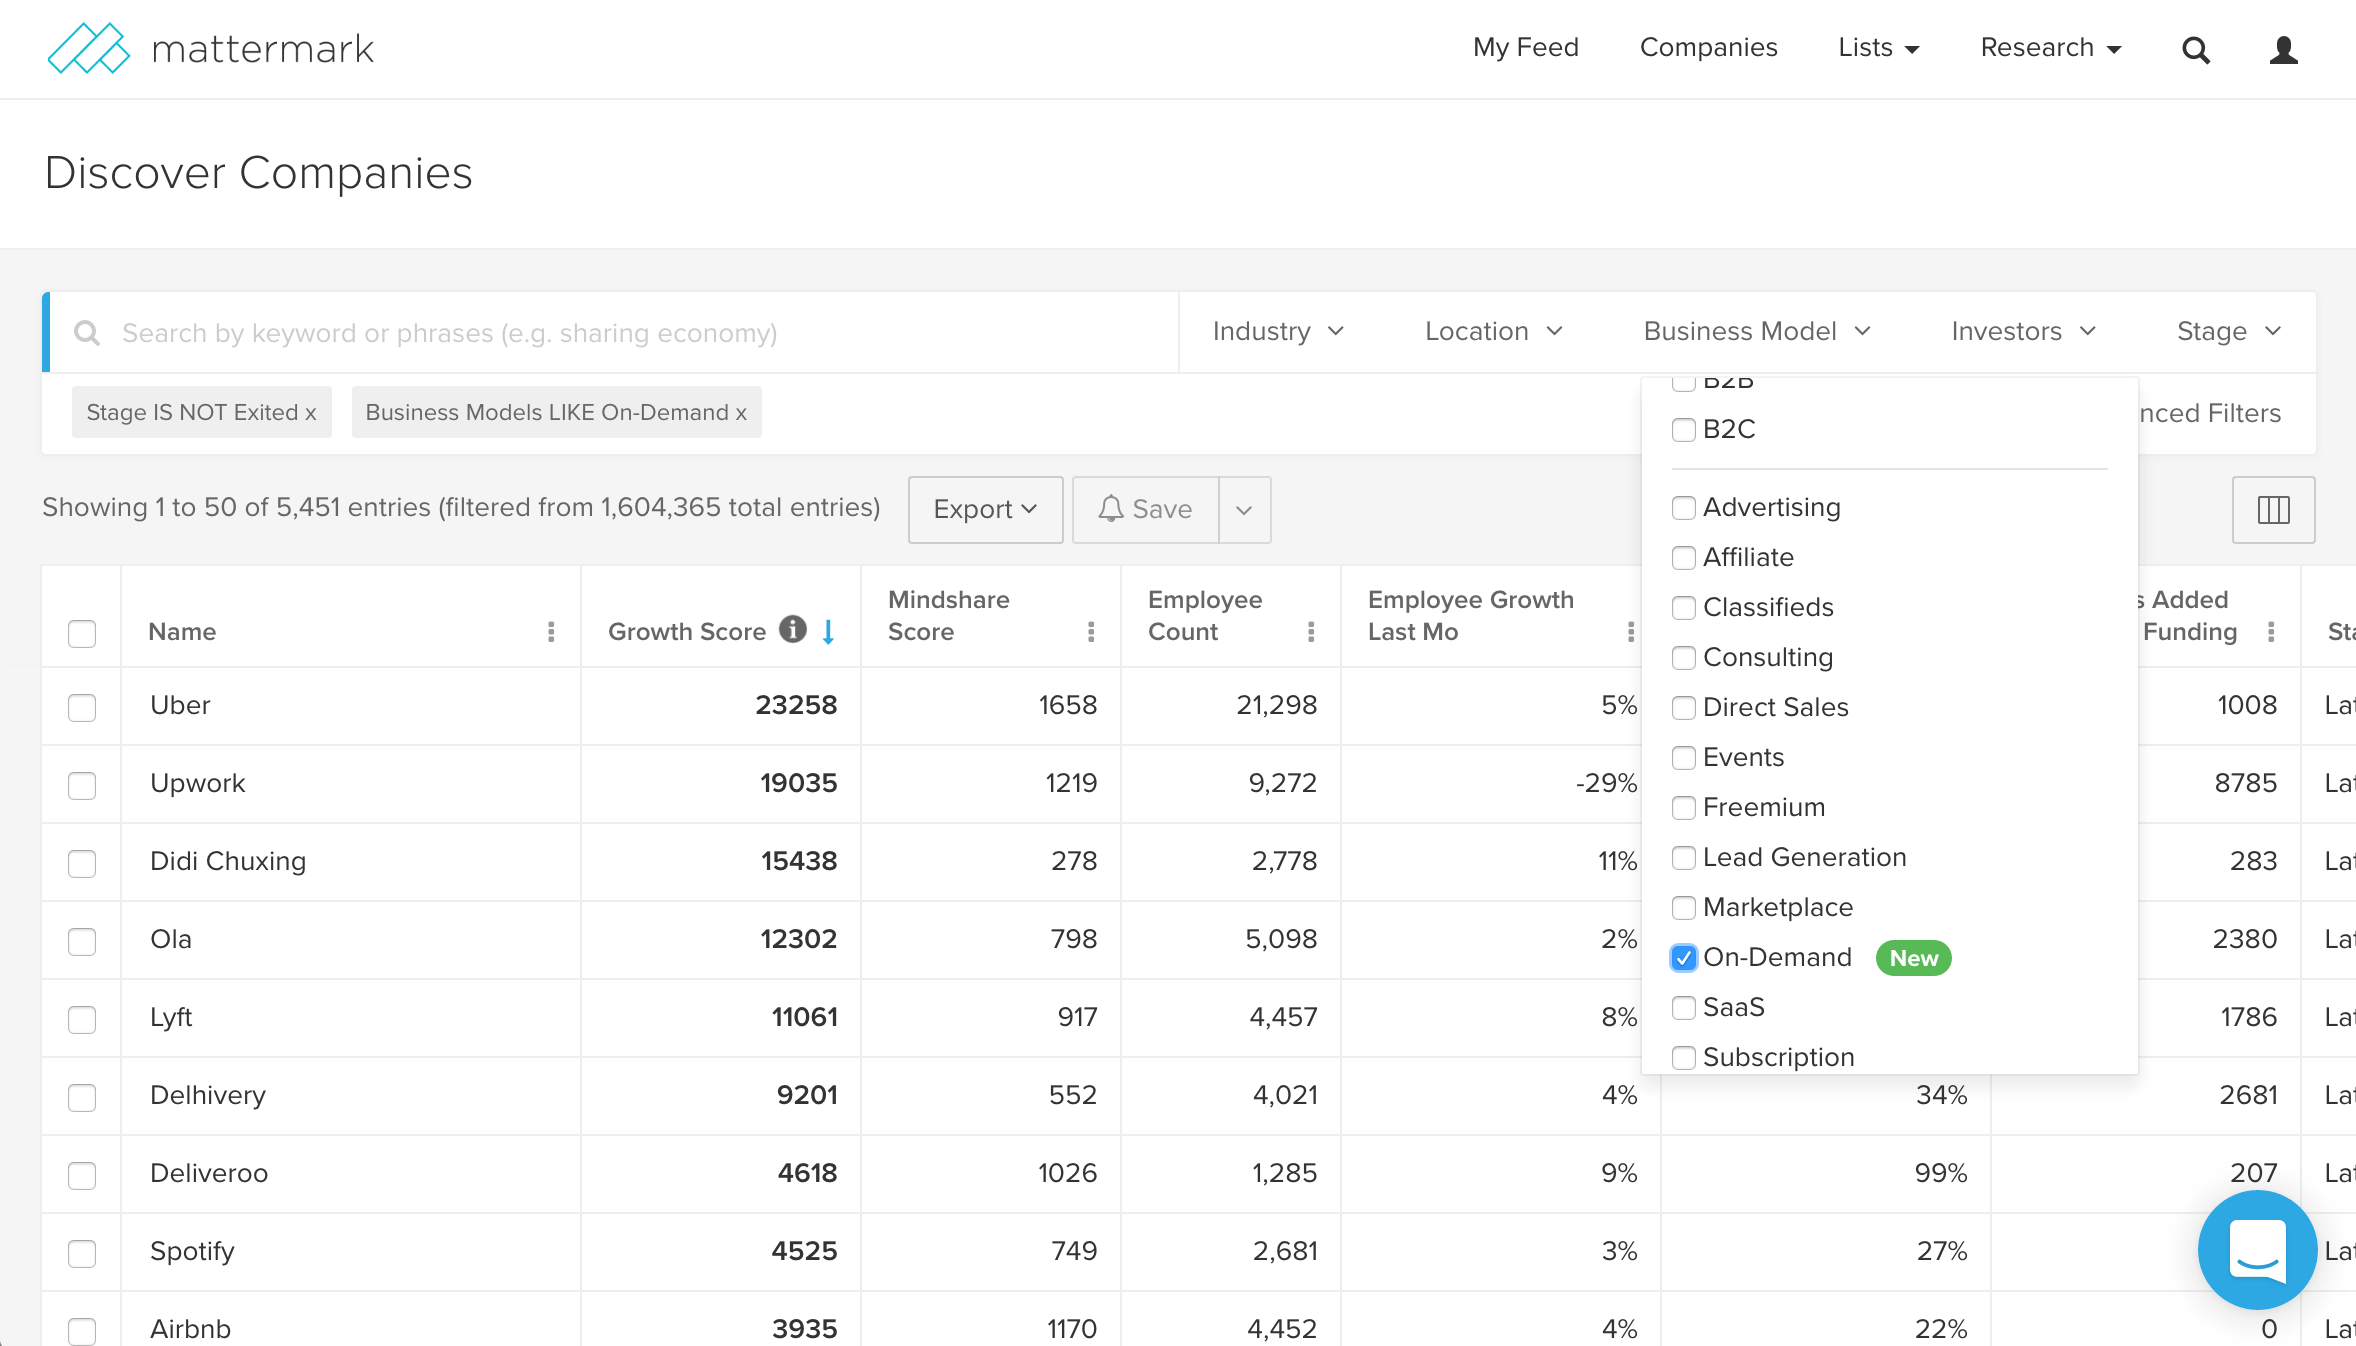 post image for Segment Company Search Results With New “On-Demand” Filter